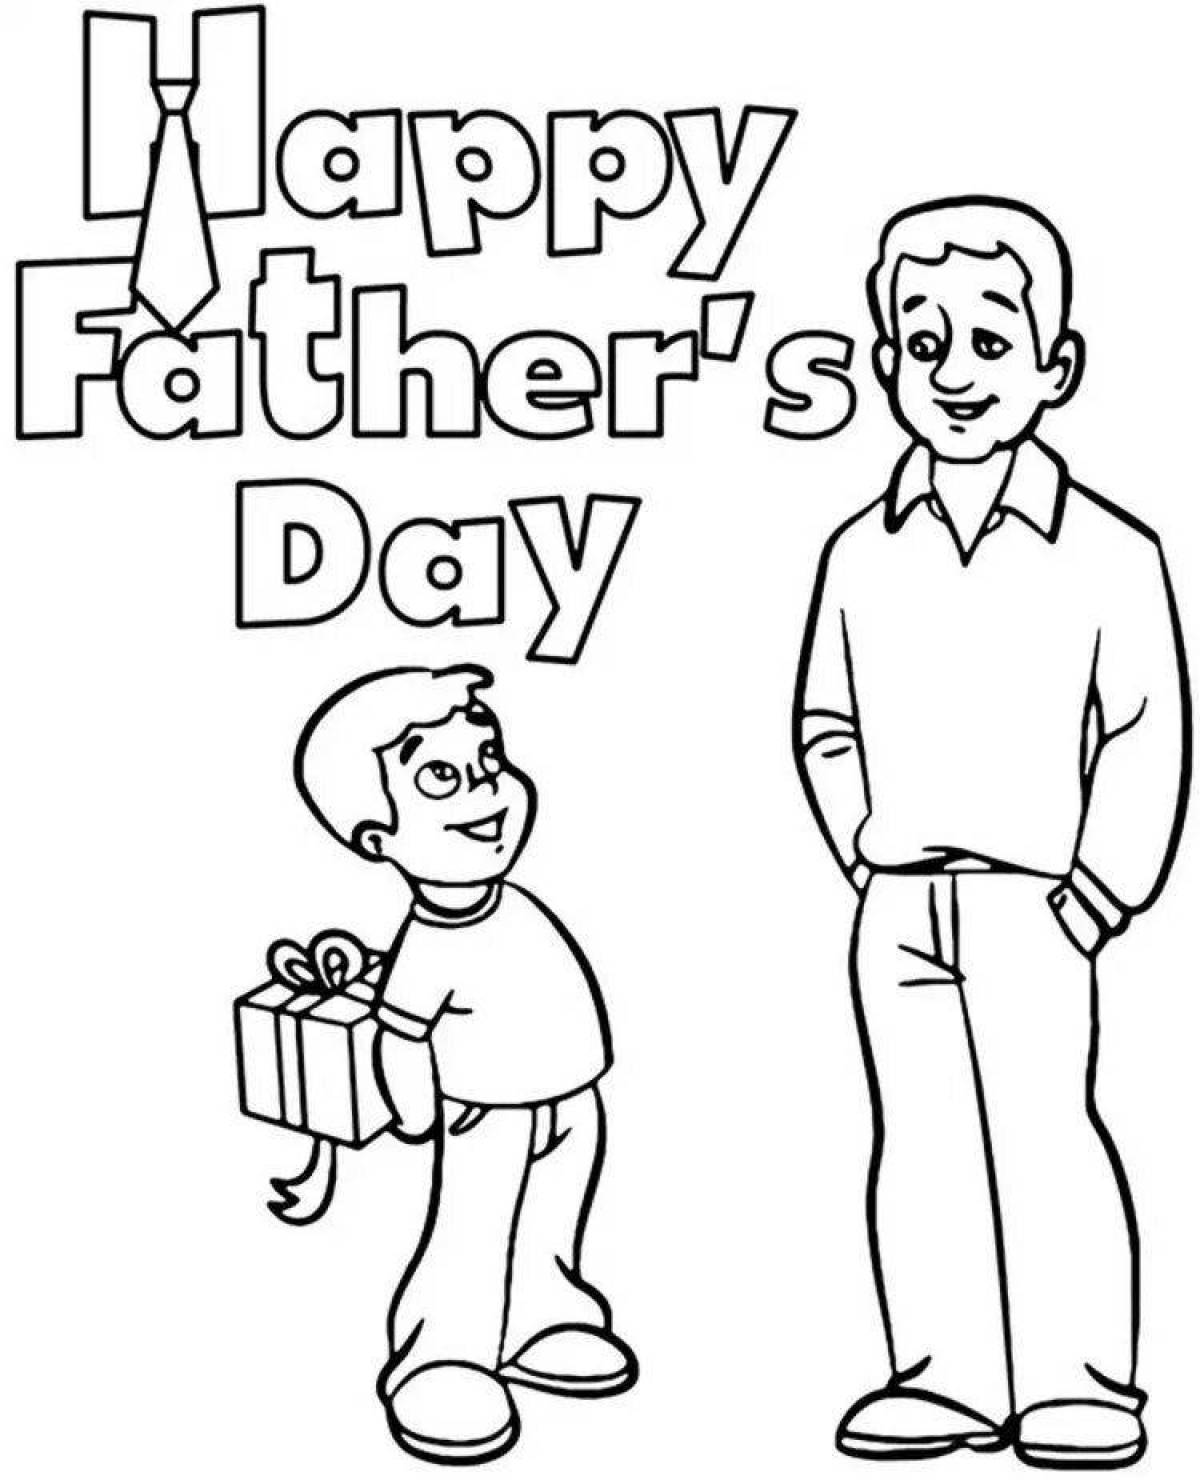 Sweet card for dad